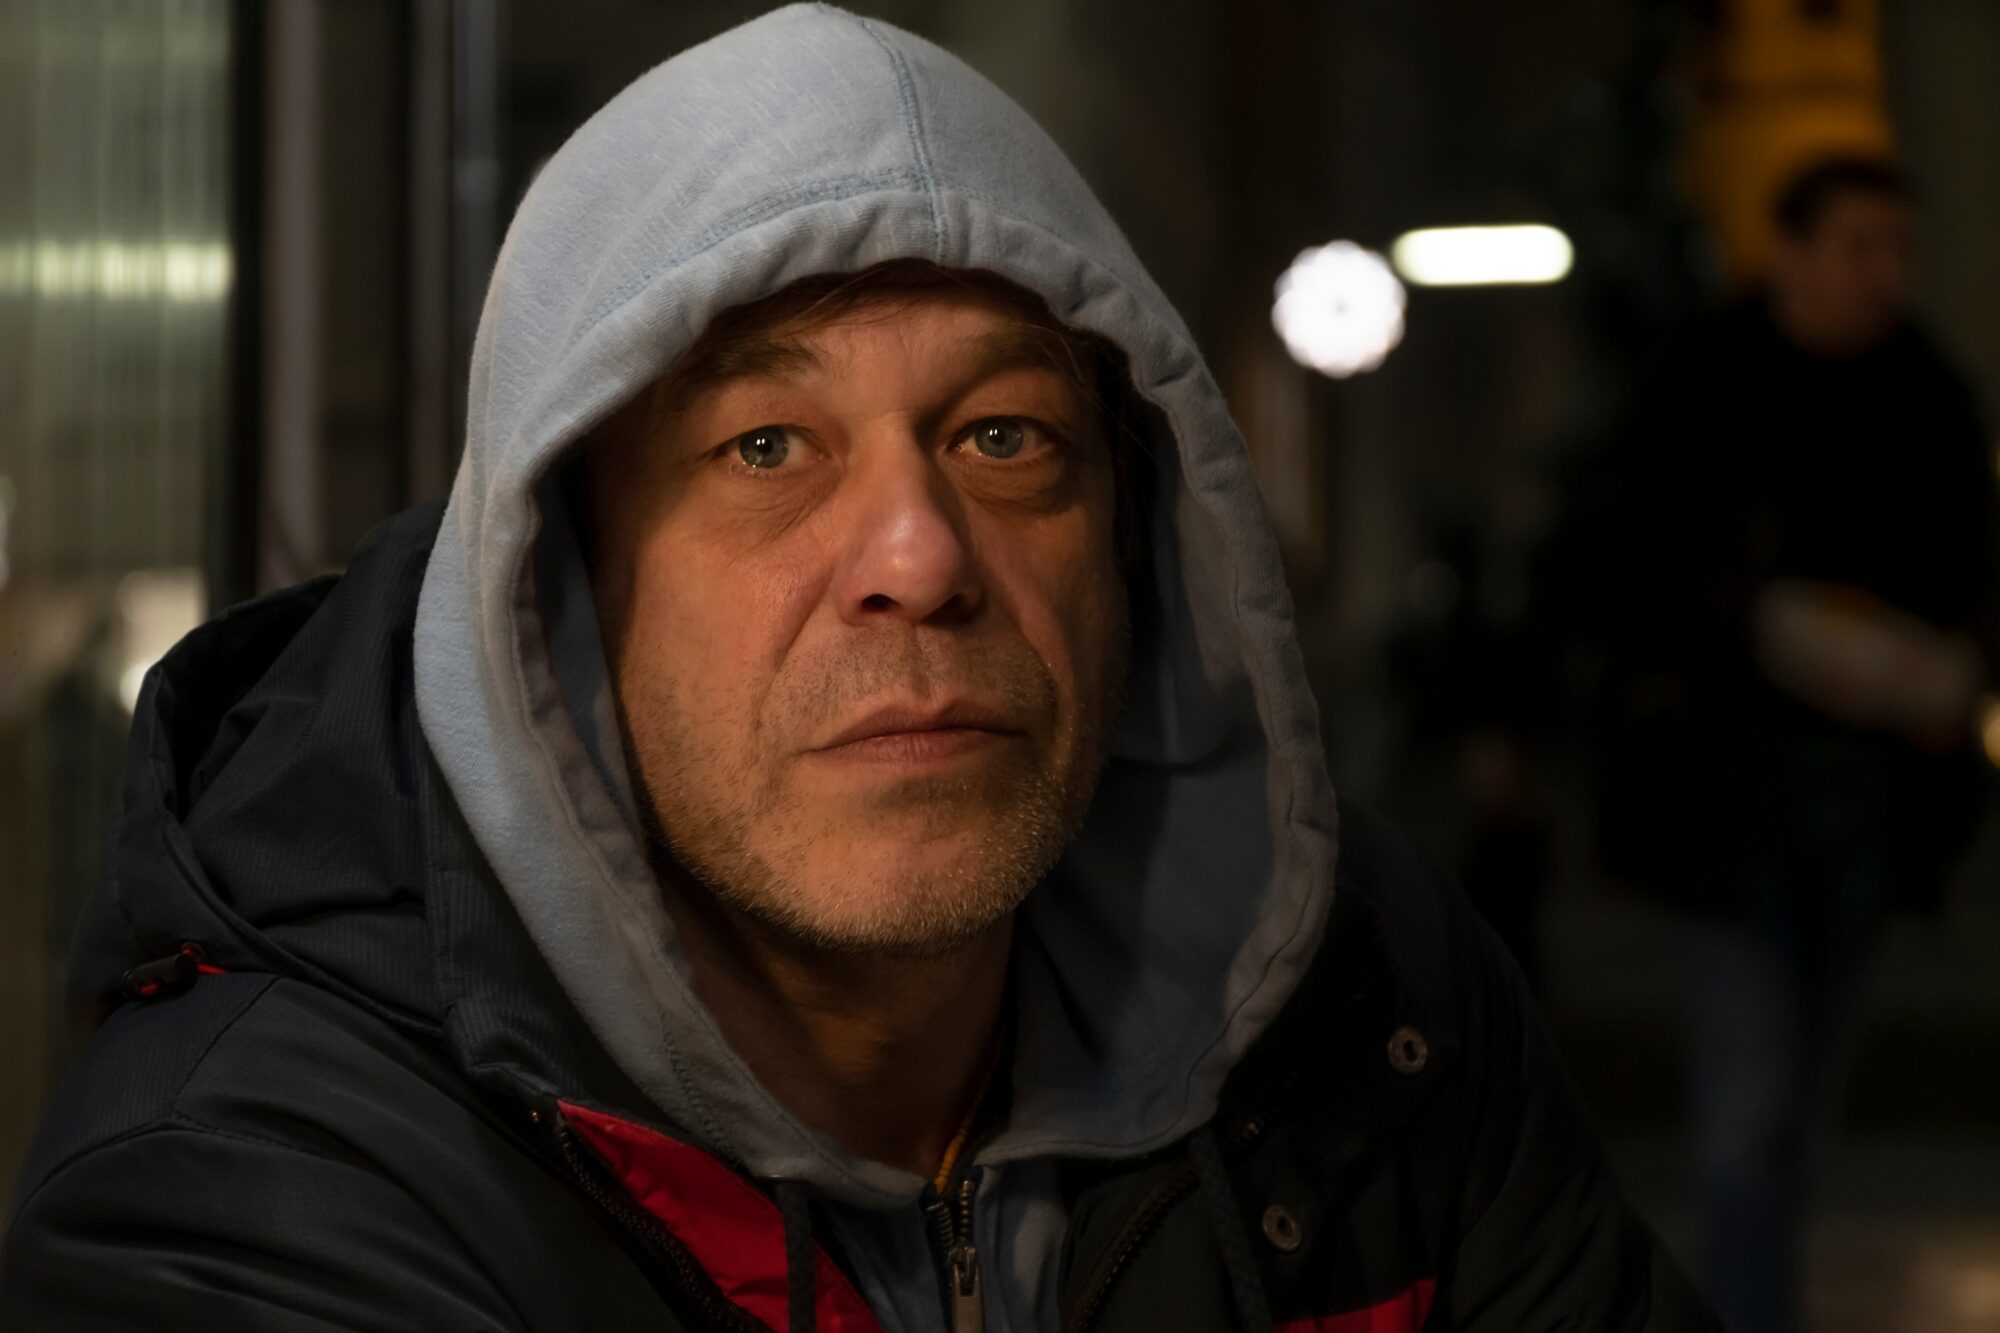 A photo of a man wearing a grey hooded top.